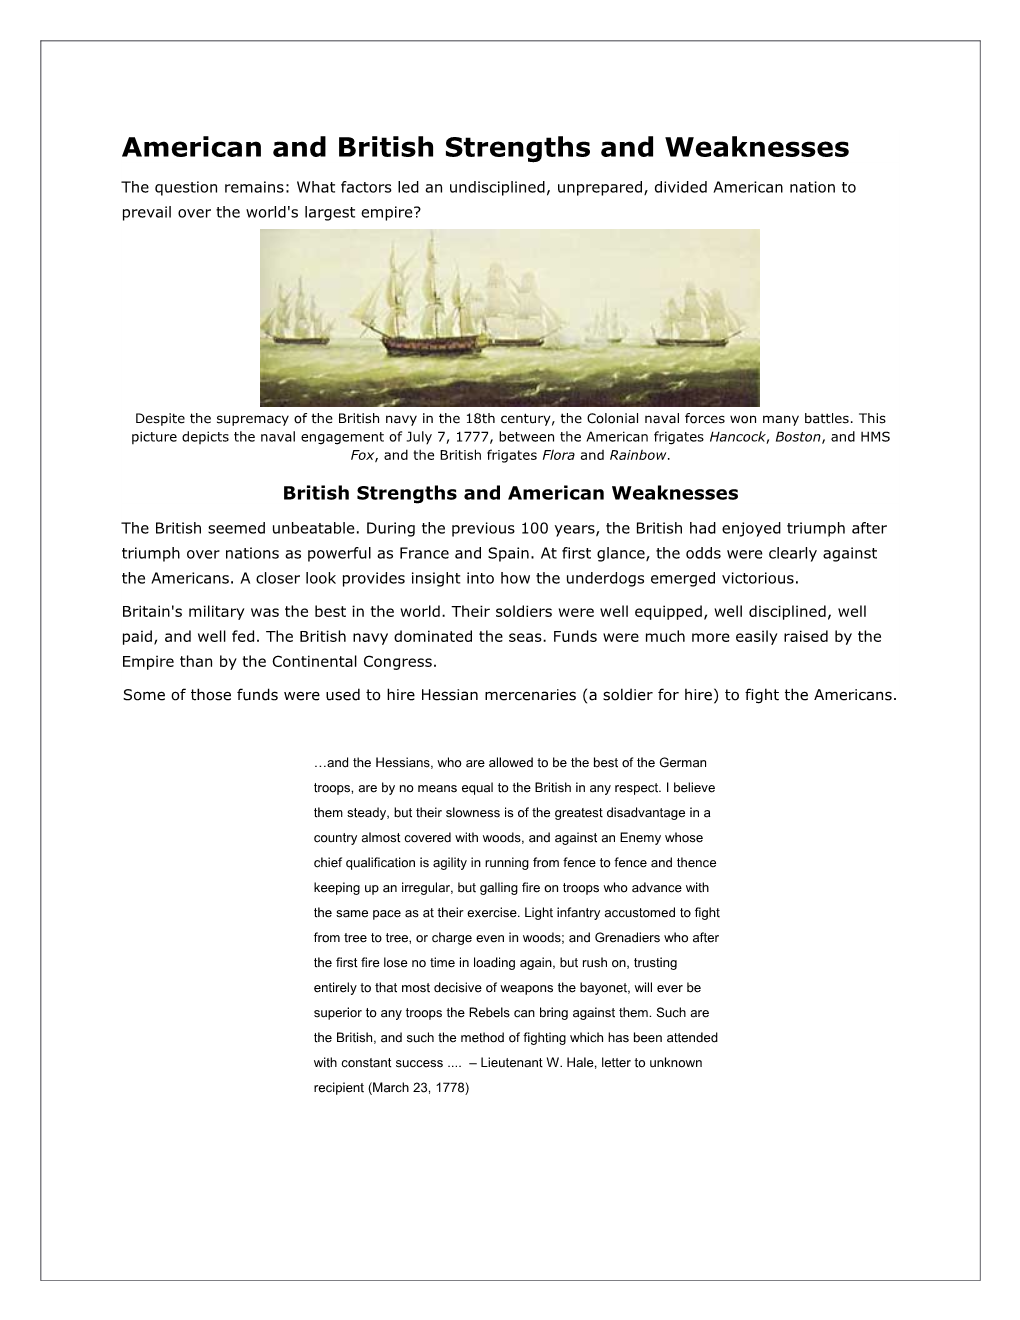 American and British Strengths and Weaknesses